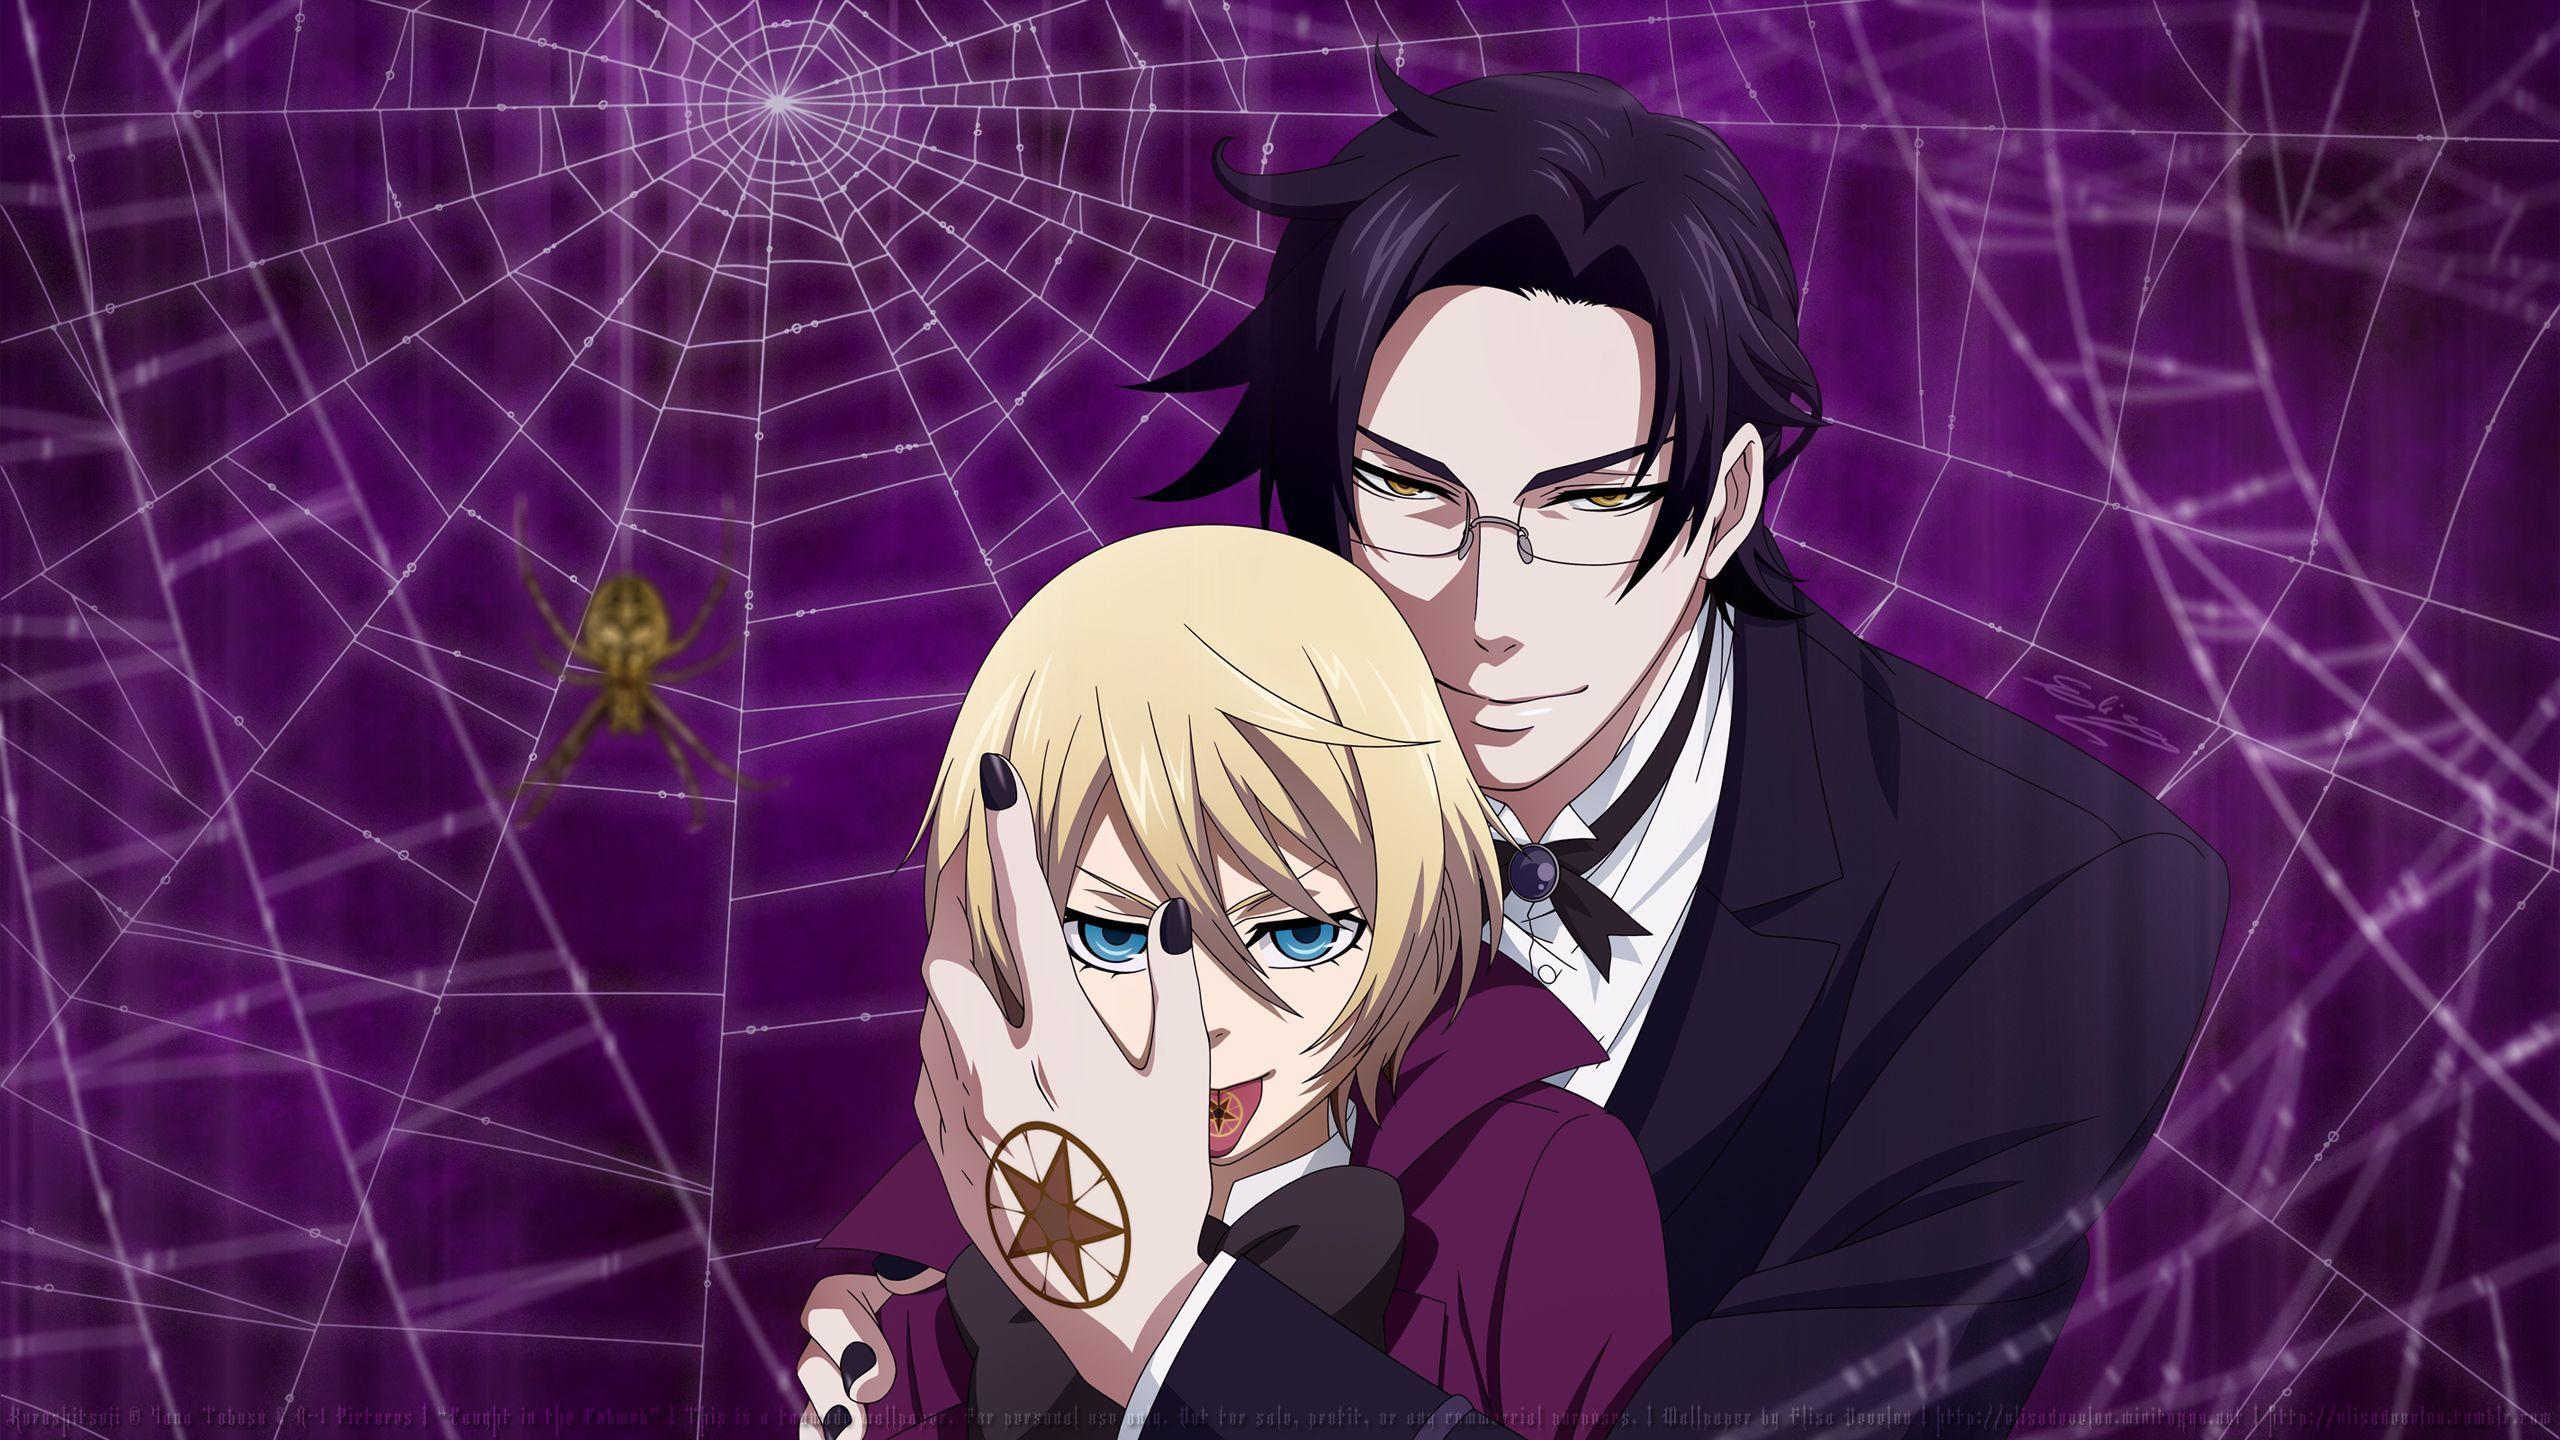 Alois Trancy Wallpapers - Top Free Alois Trancy Backgrounds ...